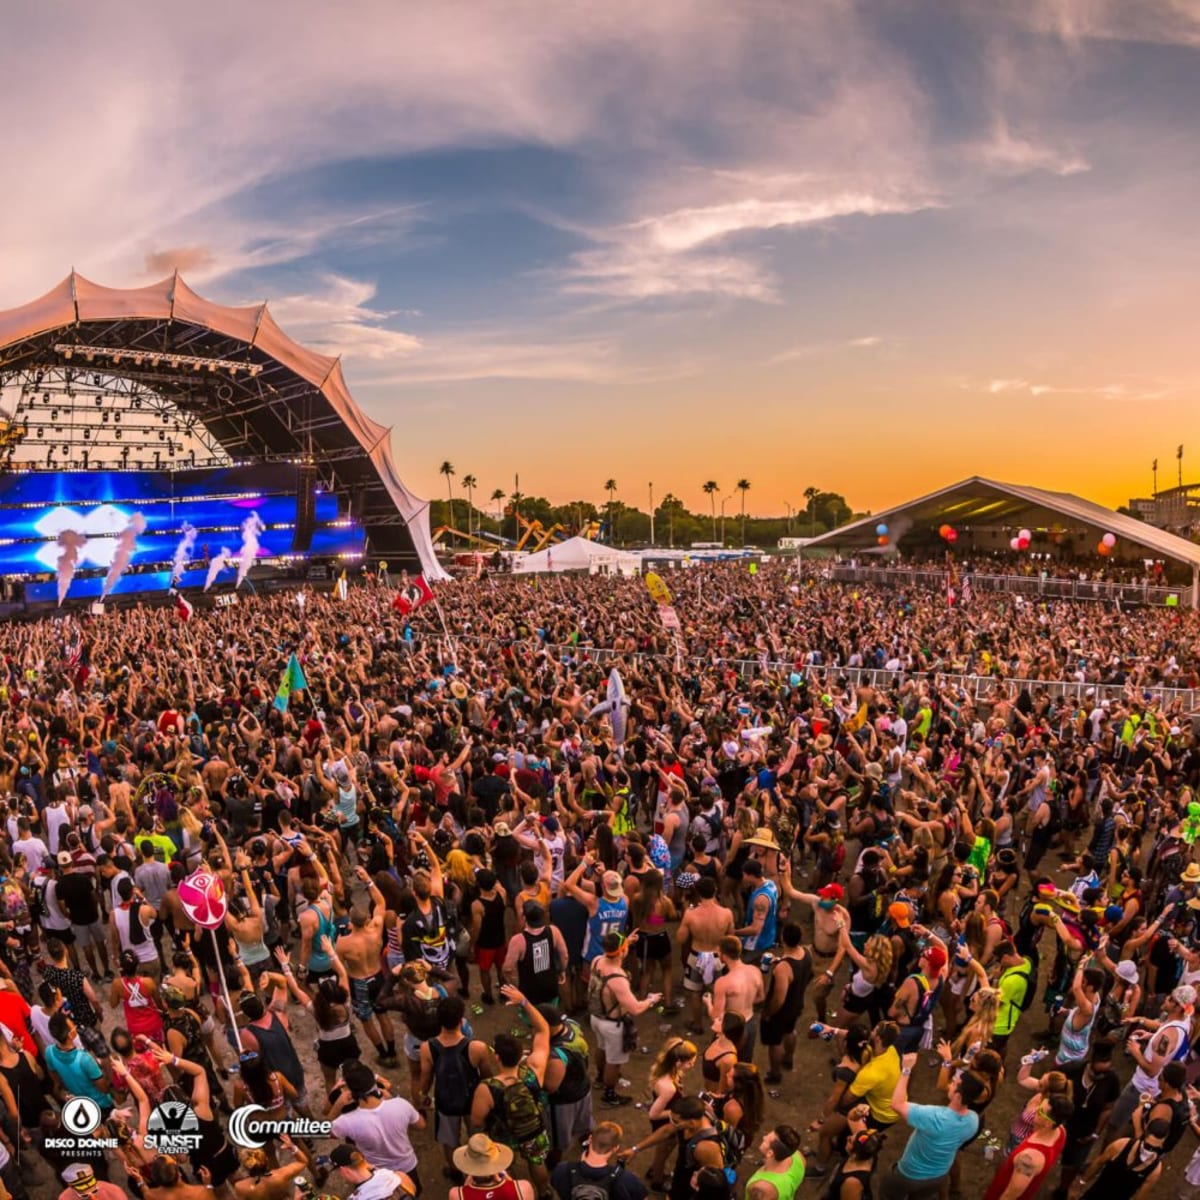 Sunset Music Festival Day 2 Canceled Due to Weather  - The Latest  Electronic Dance Music News, Reviews & Artists